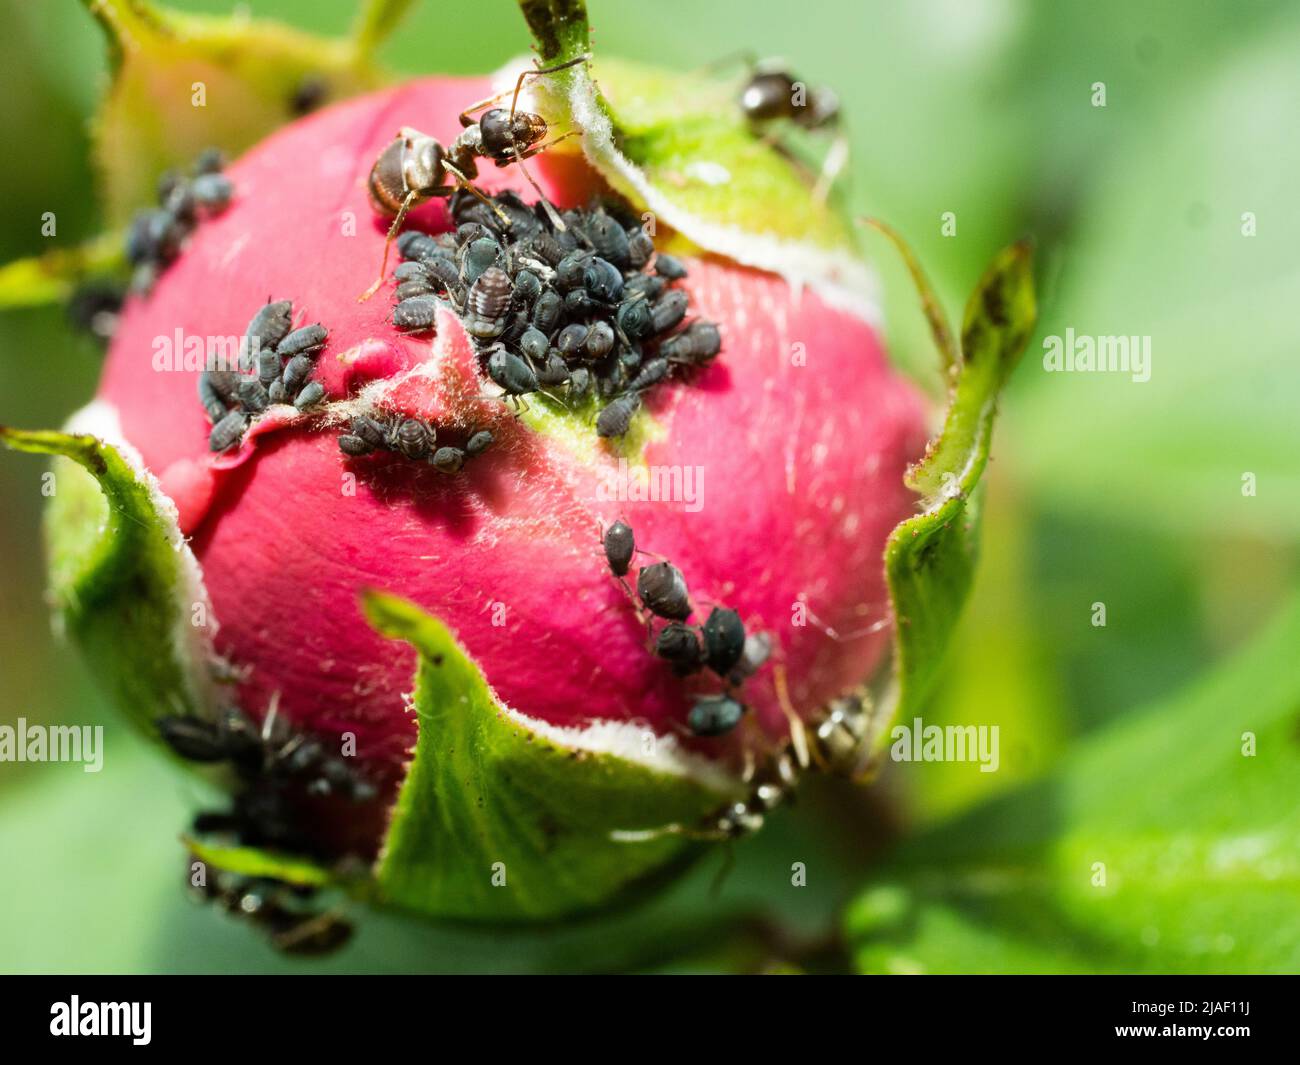 aphids and ants on a rose bud; flower bud with plant lice close-up; ants milking aphids honeydew Stock Photo